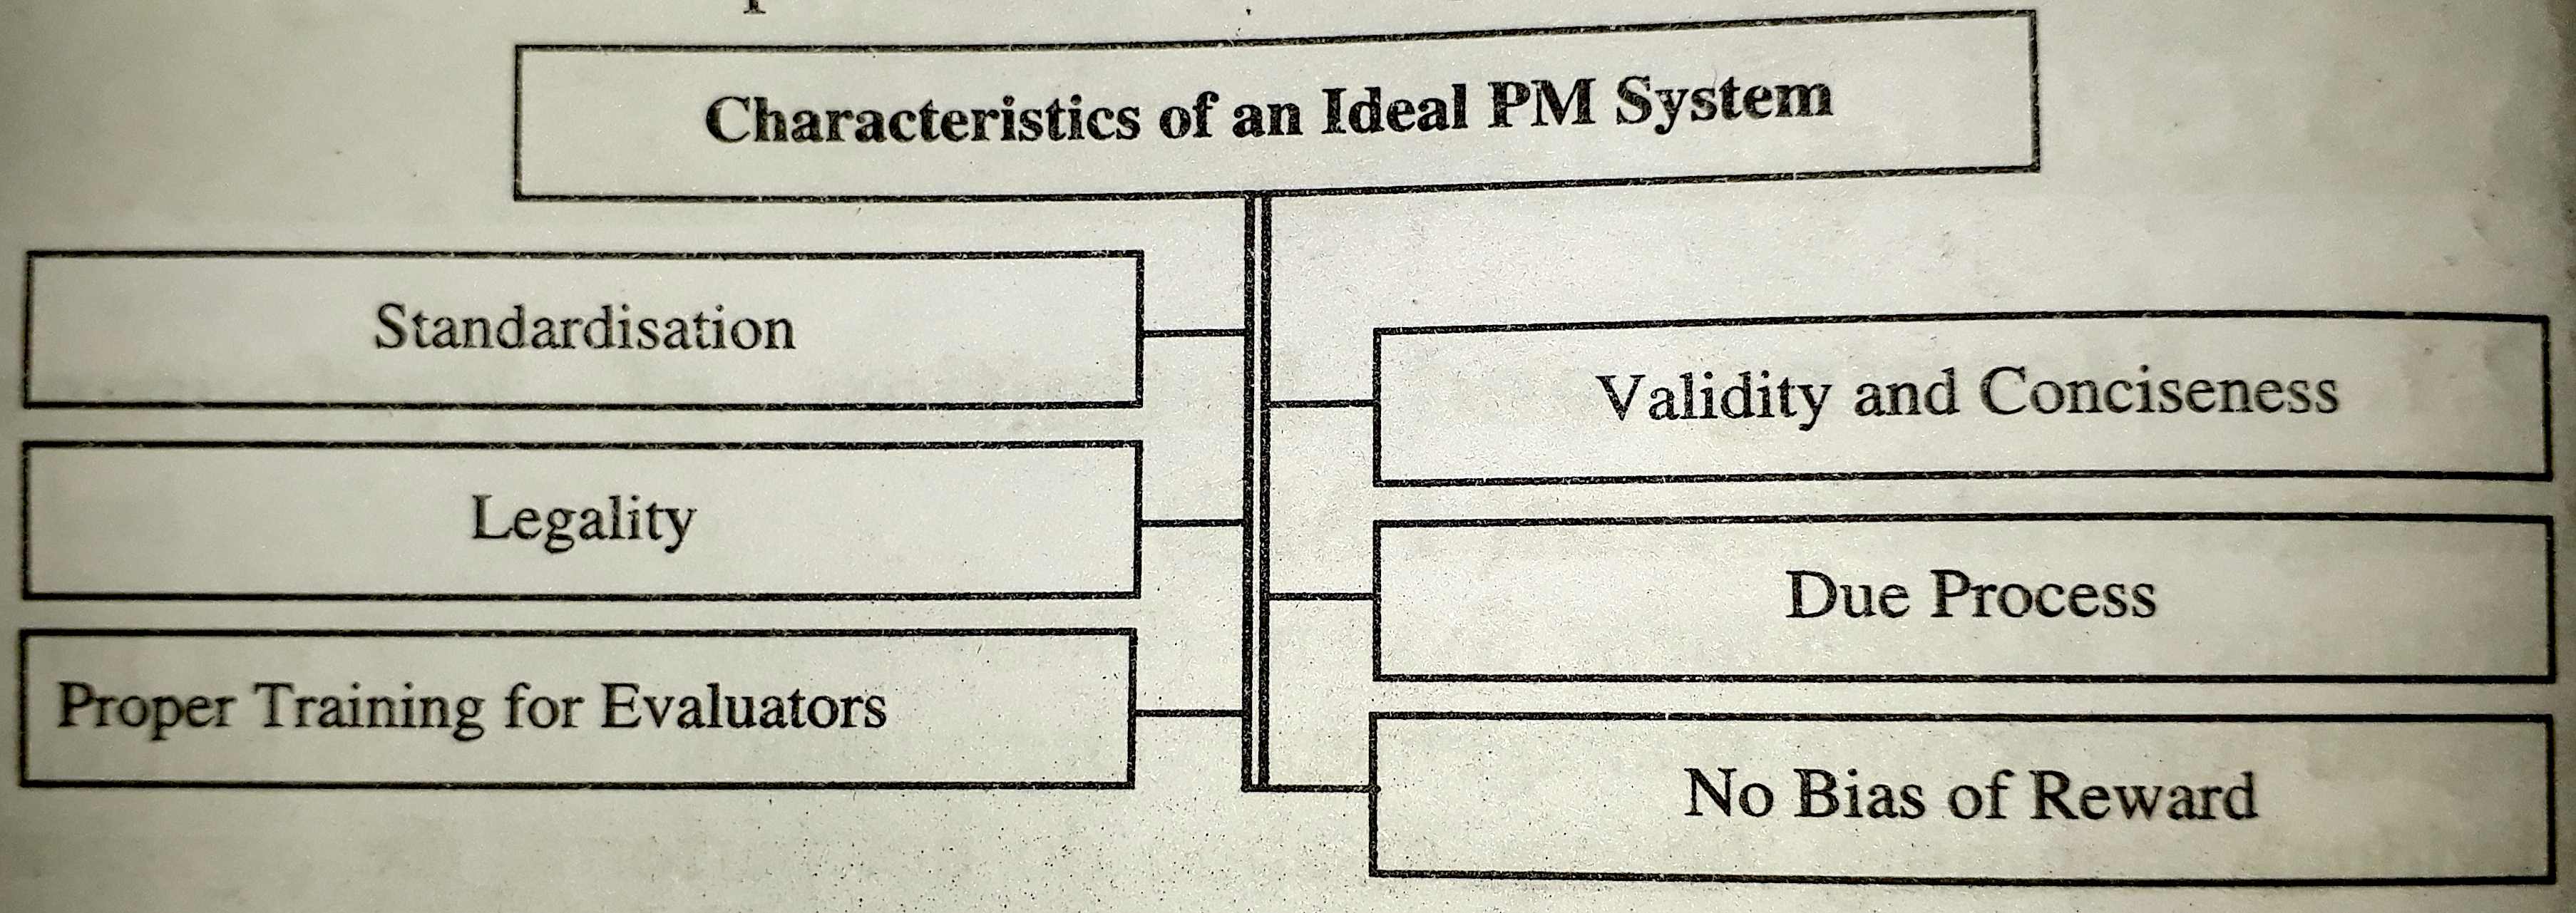 Characteristics of an Ideal PM System